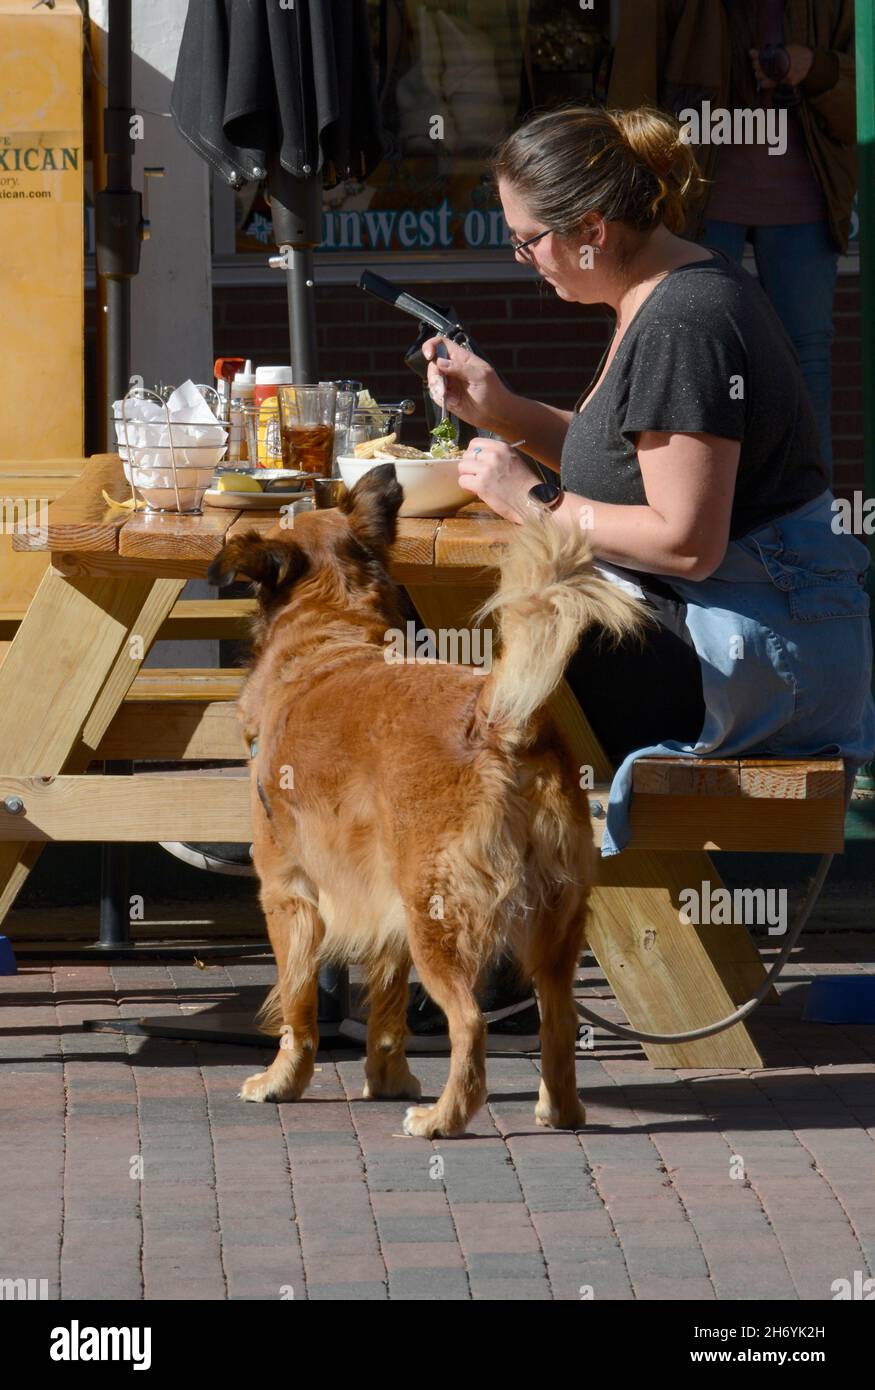 A woman enjoys lunch at a restaurant while sitting alone at an outdoor table with her pet dog at her side. The waitress is wearing a face mask. Stock Photo